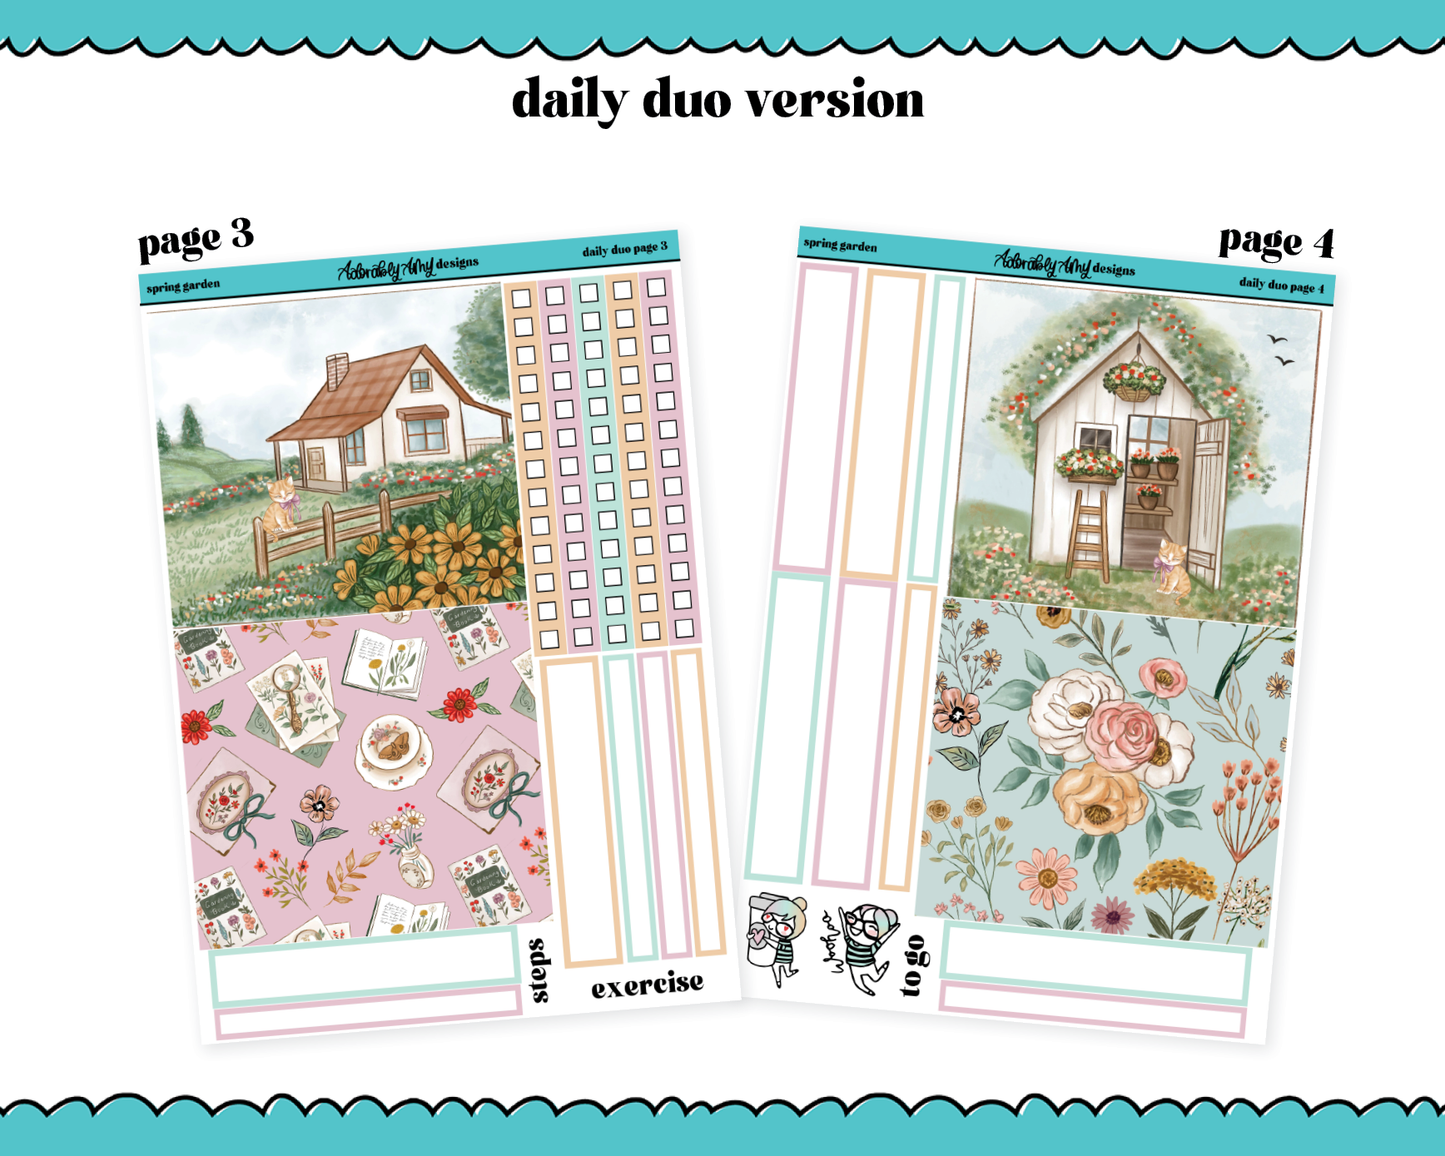 Daily Duo Spring Garden Weekly Planner Sticker Kit for Daily Duo Planner